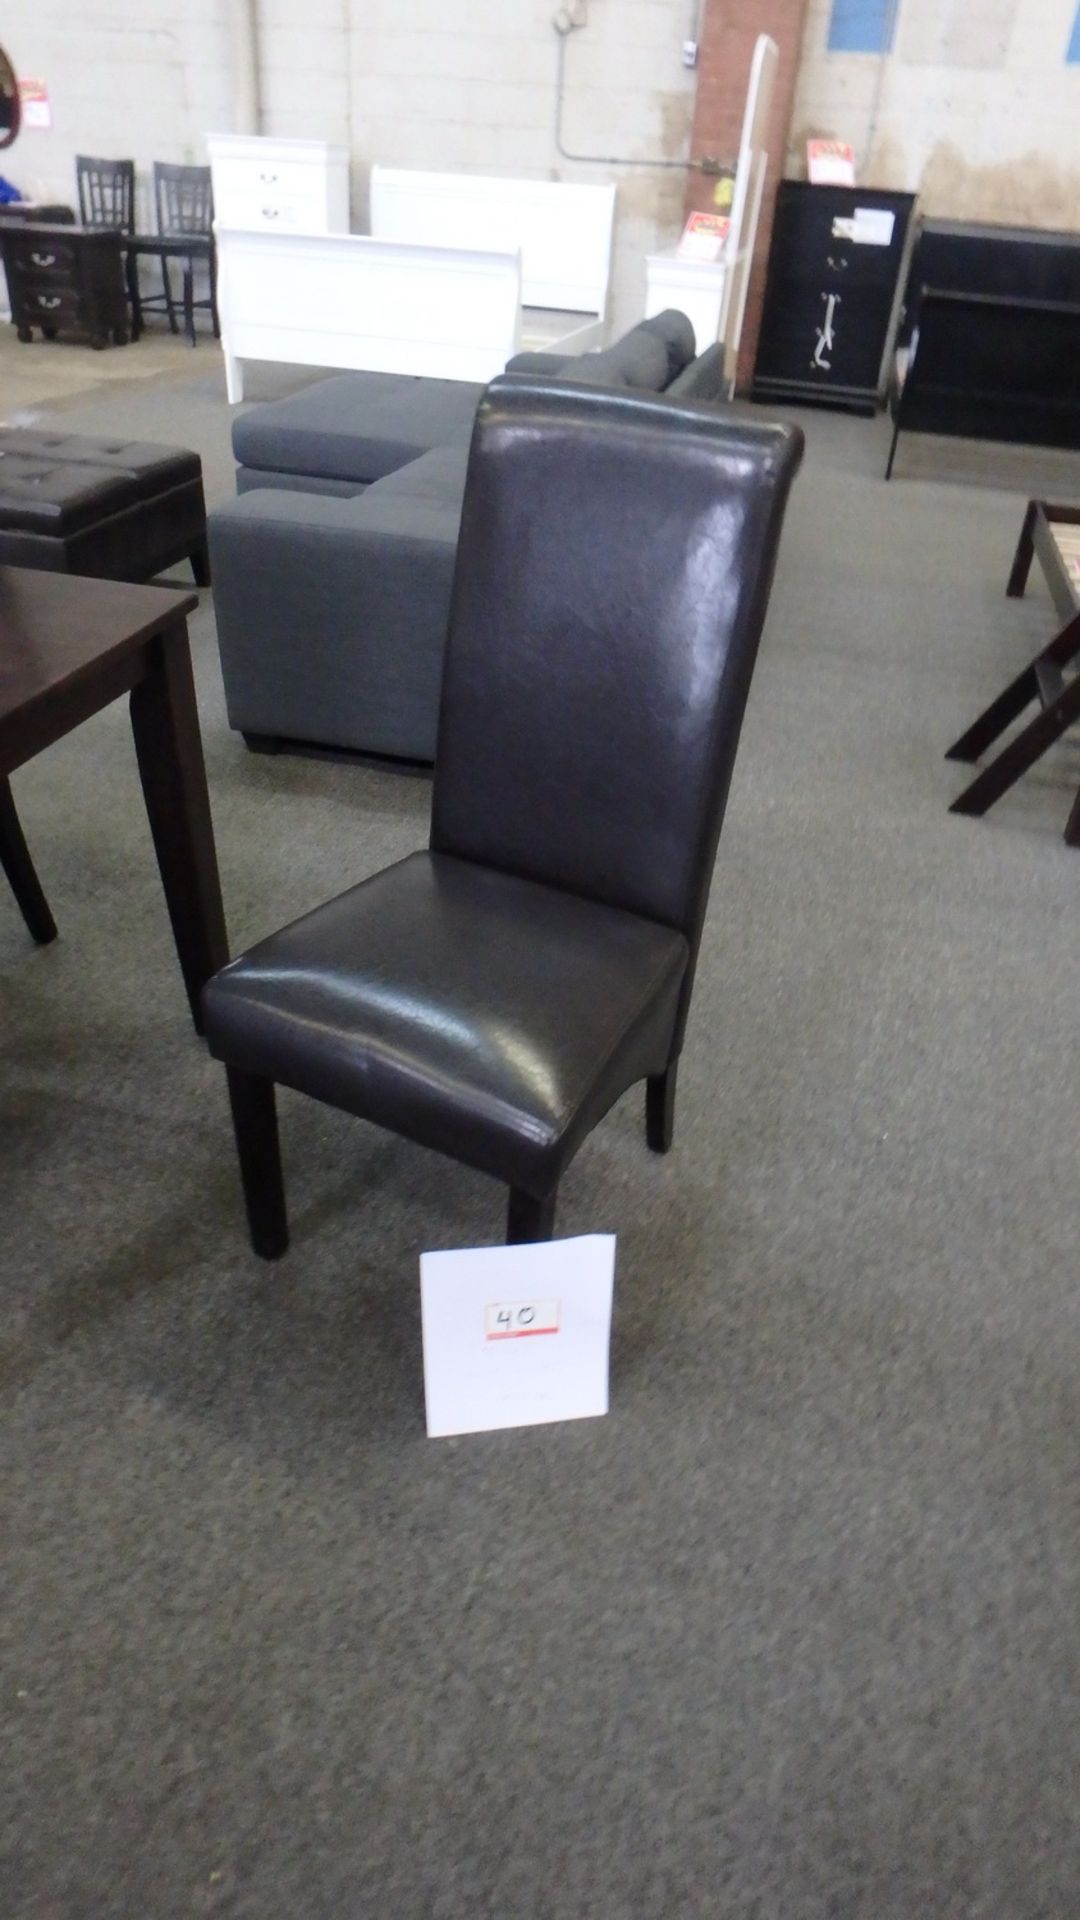 BOXES - (LK-9023) ESPRESSO DINING CHAIR (NEW IN BOX) (2 CHAIRS / BOX)